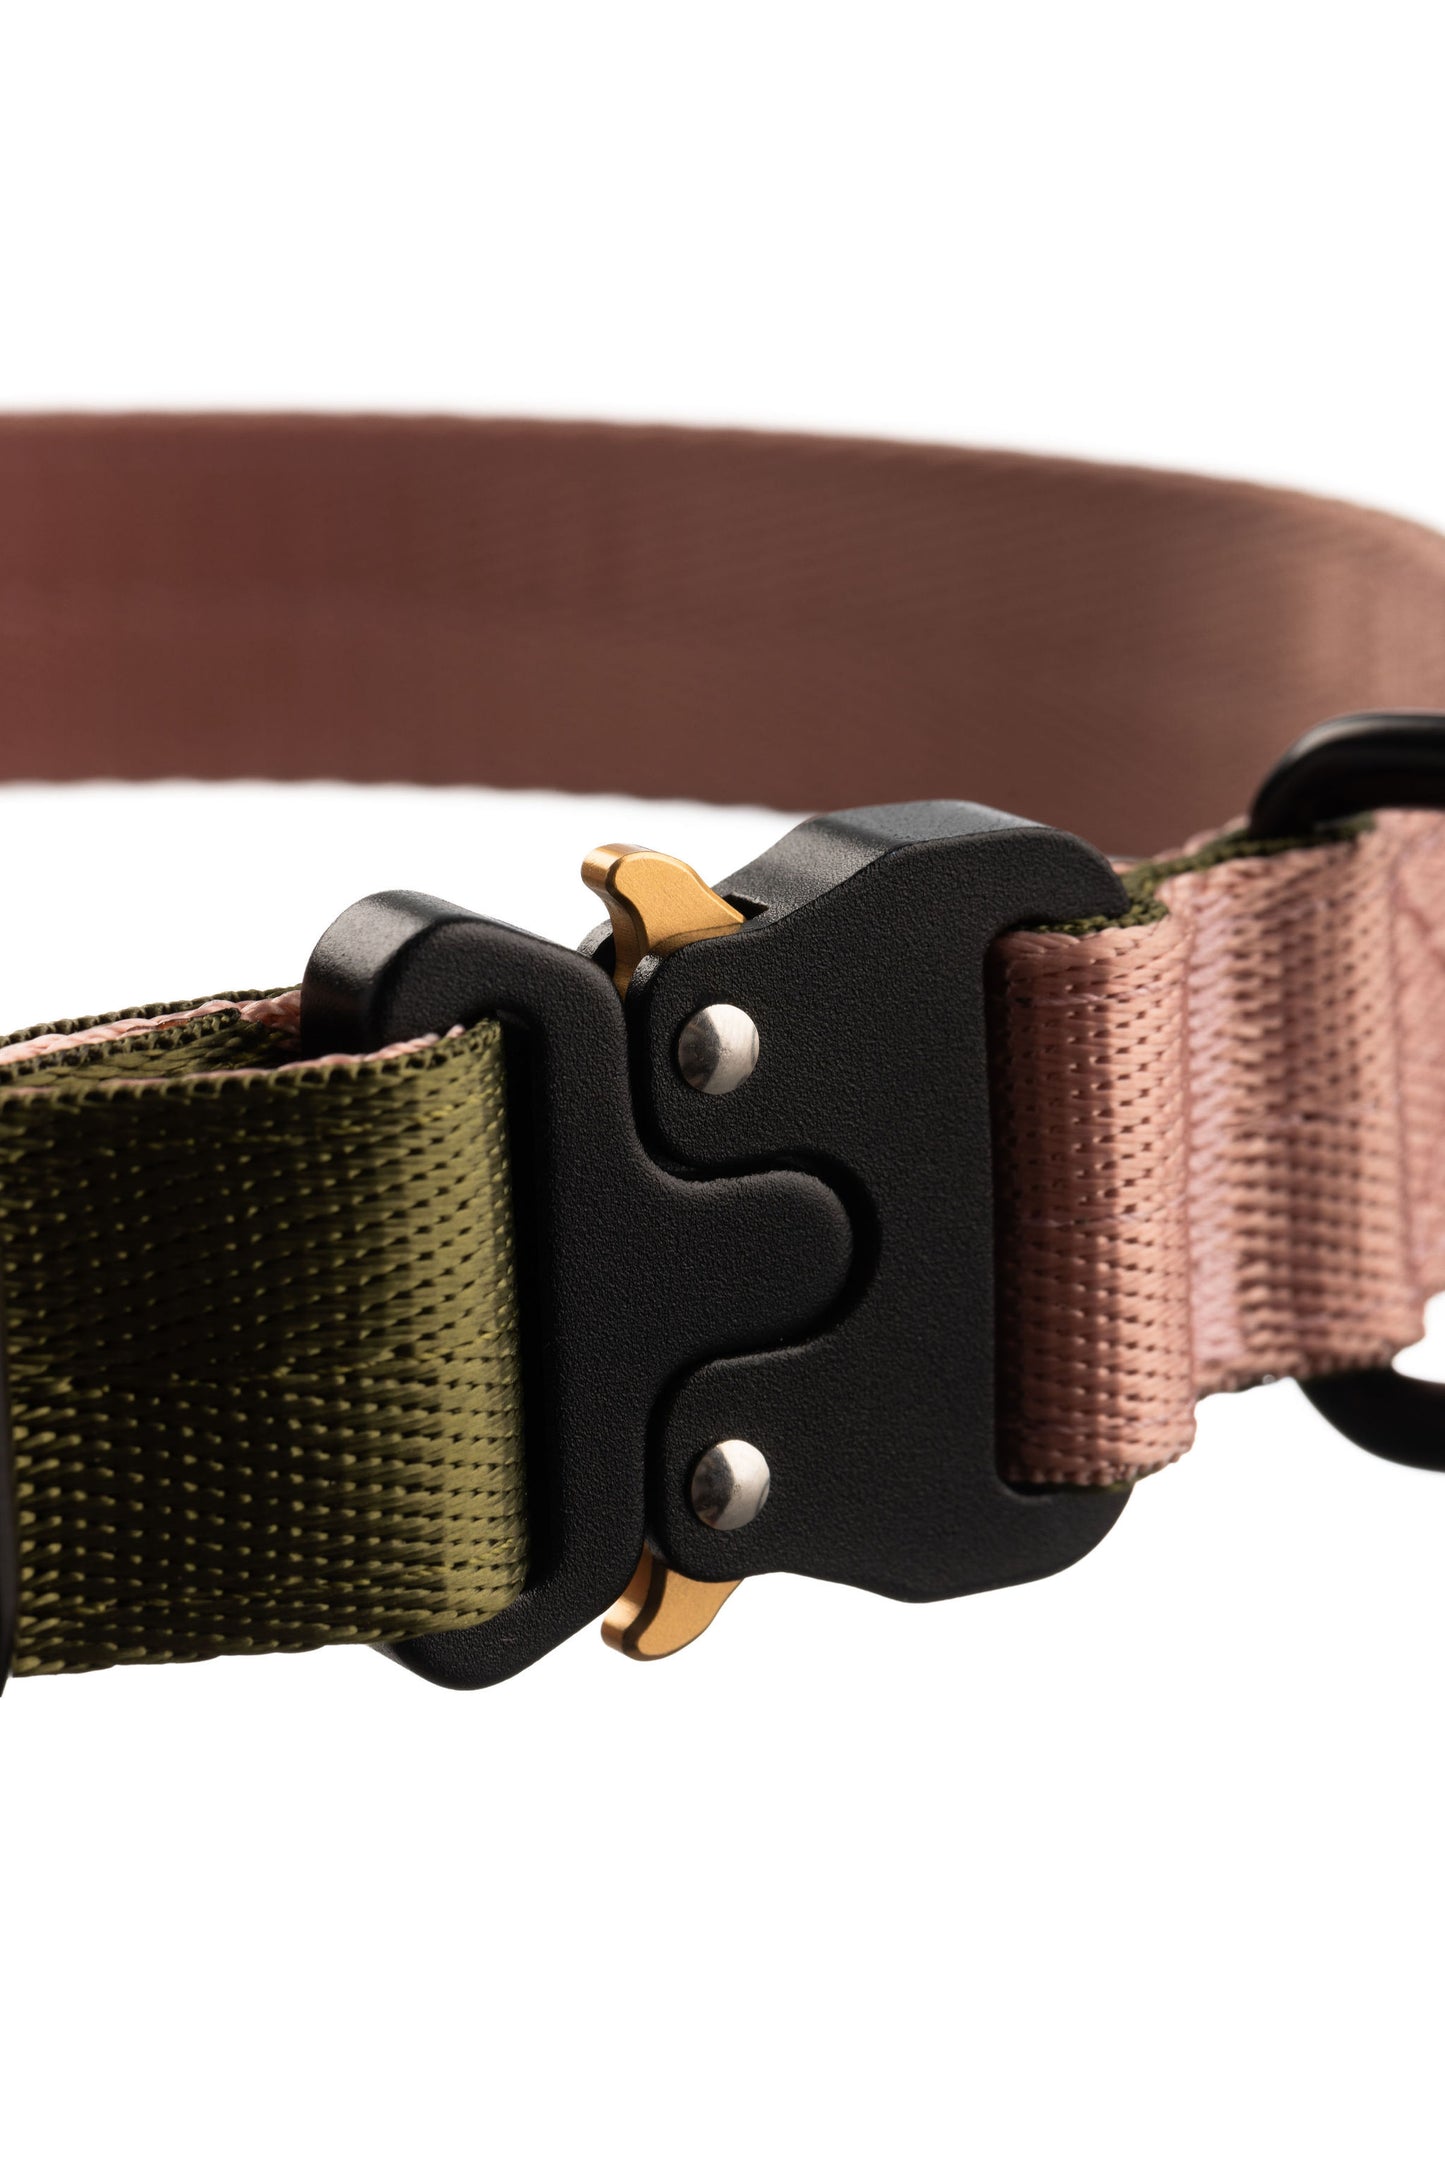 Close up of dog collar clip closed in black metal with gold tabs.